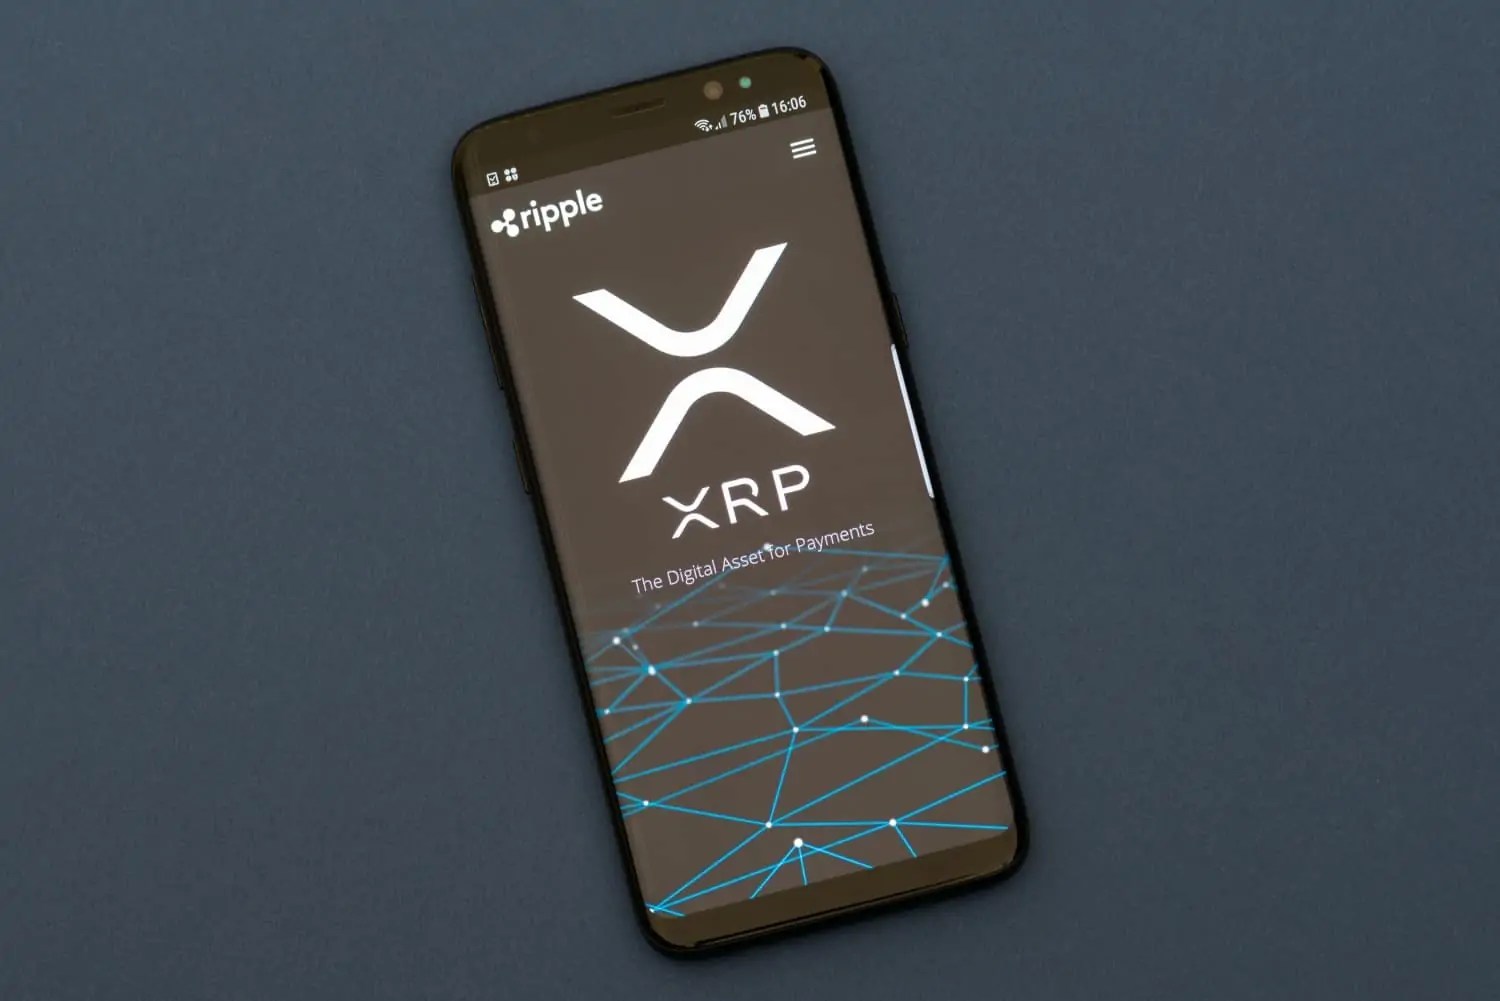 XRPs-regulatory-status-still-unclear-as-Ripple-discusses-with-SEC.jpg